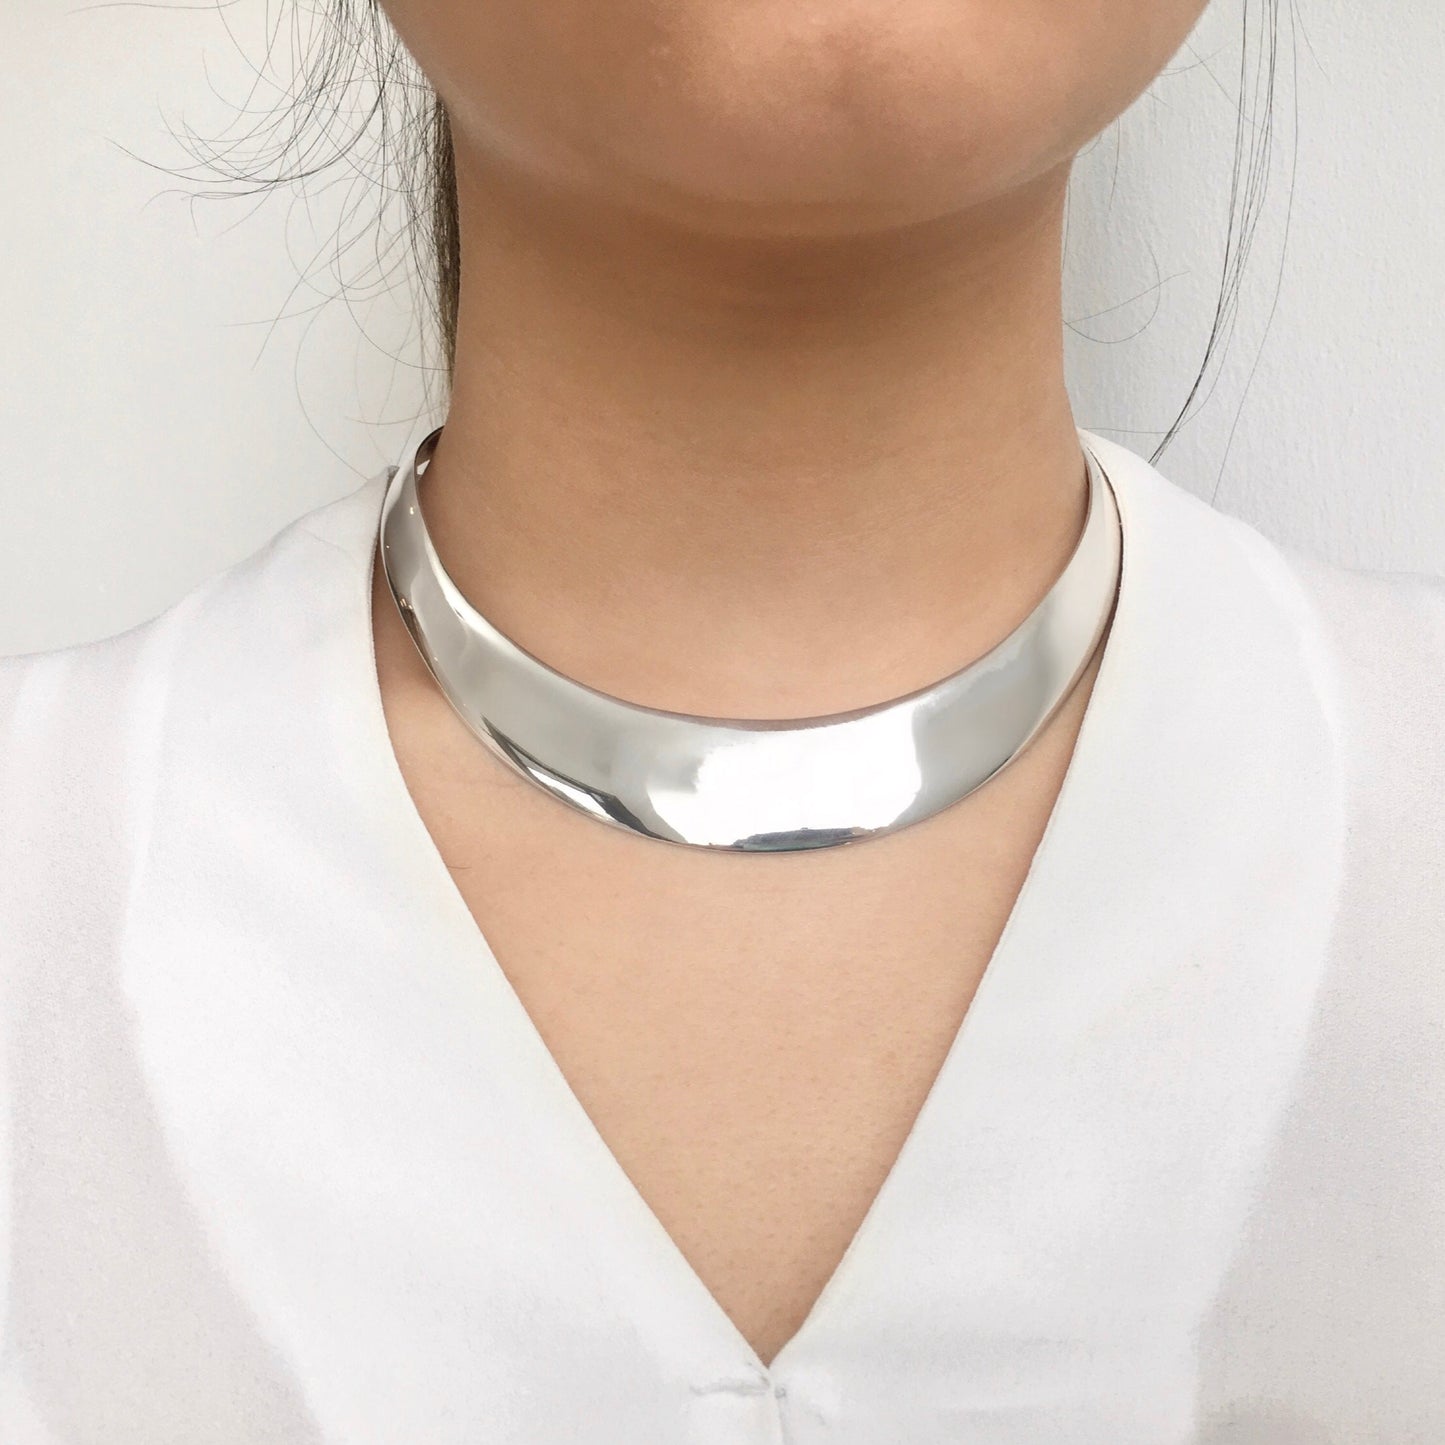 Silver Choker Collar Necklace - 16mm